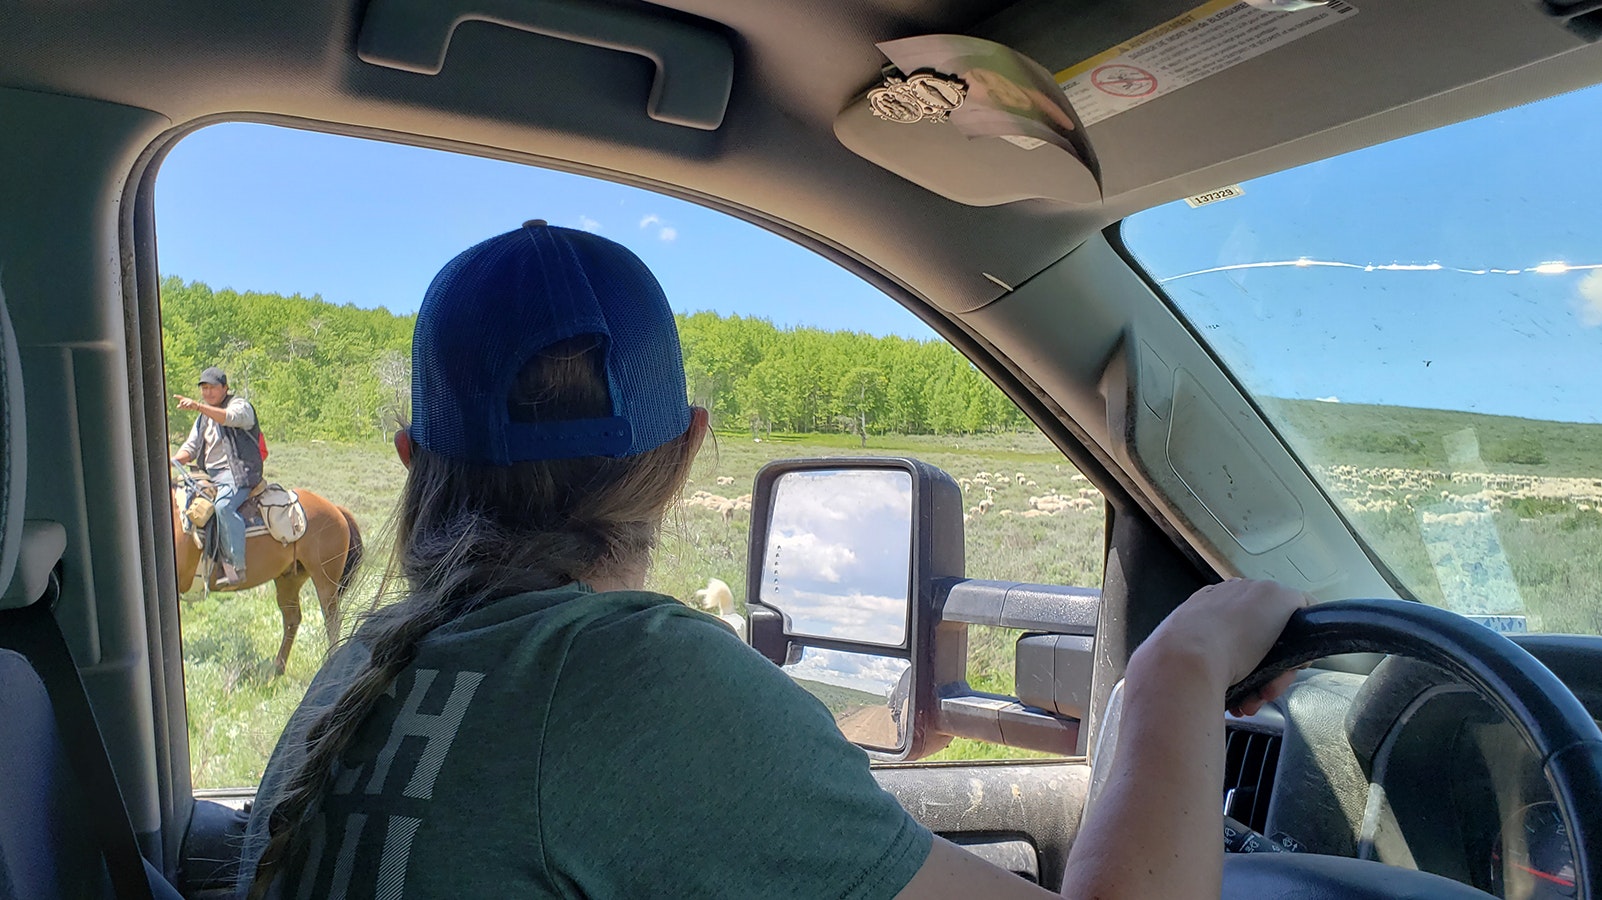 Marie McClaren talks to one of the sheepherders who tells her he needs medicine for a sheep, which she has in her truck.